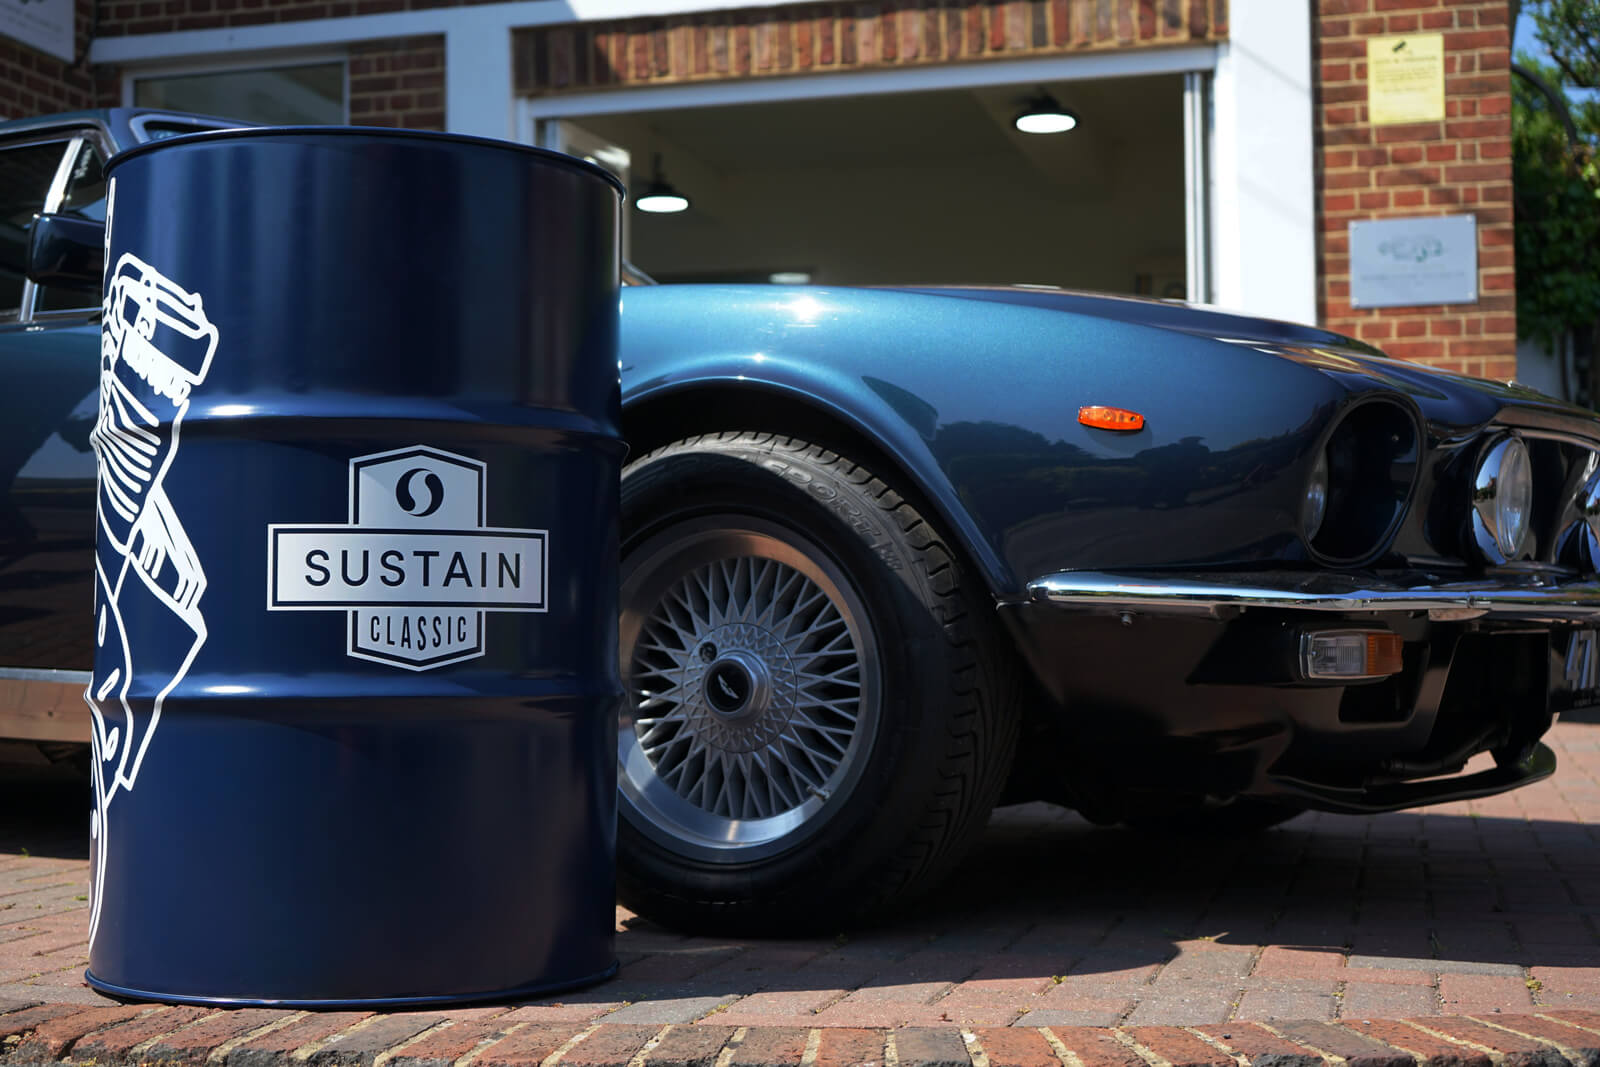 A SUSTAIN Classic drum, next to a car on the brick drive of a home